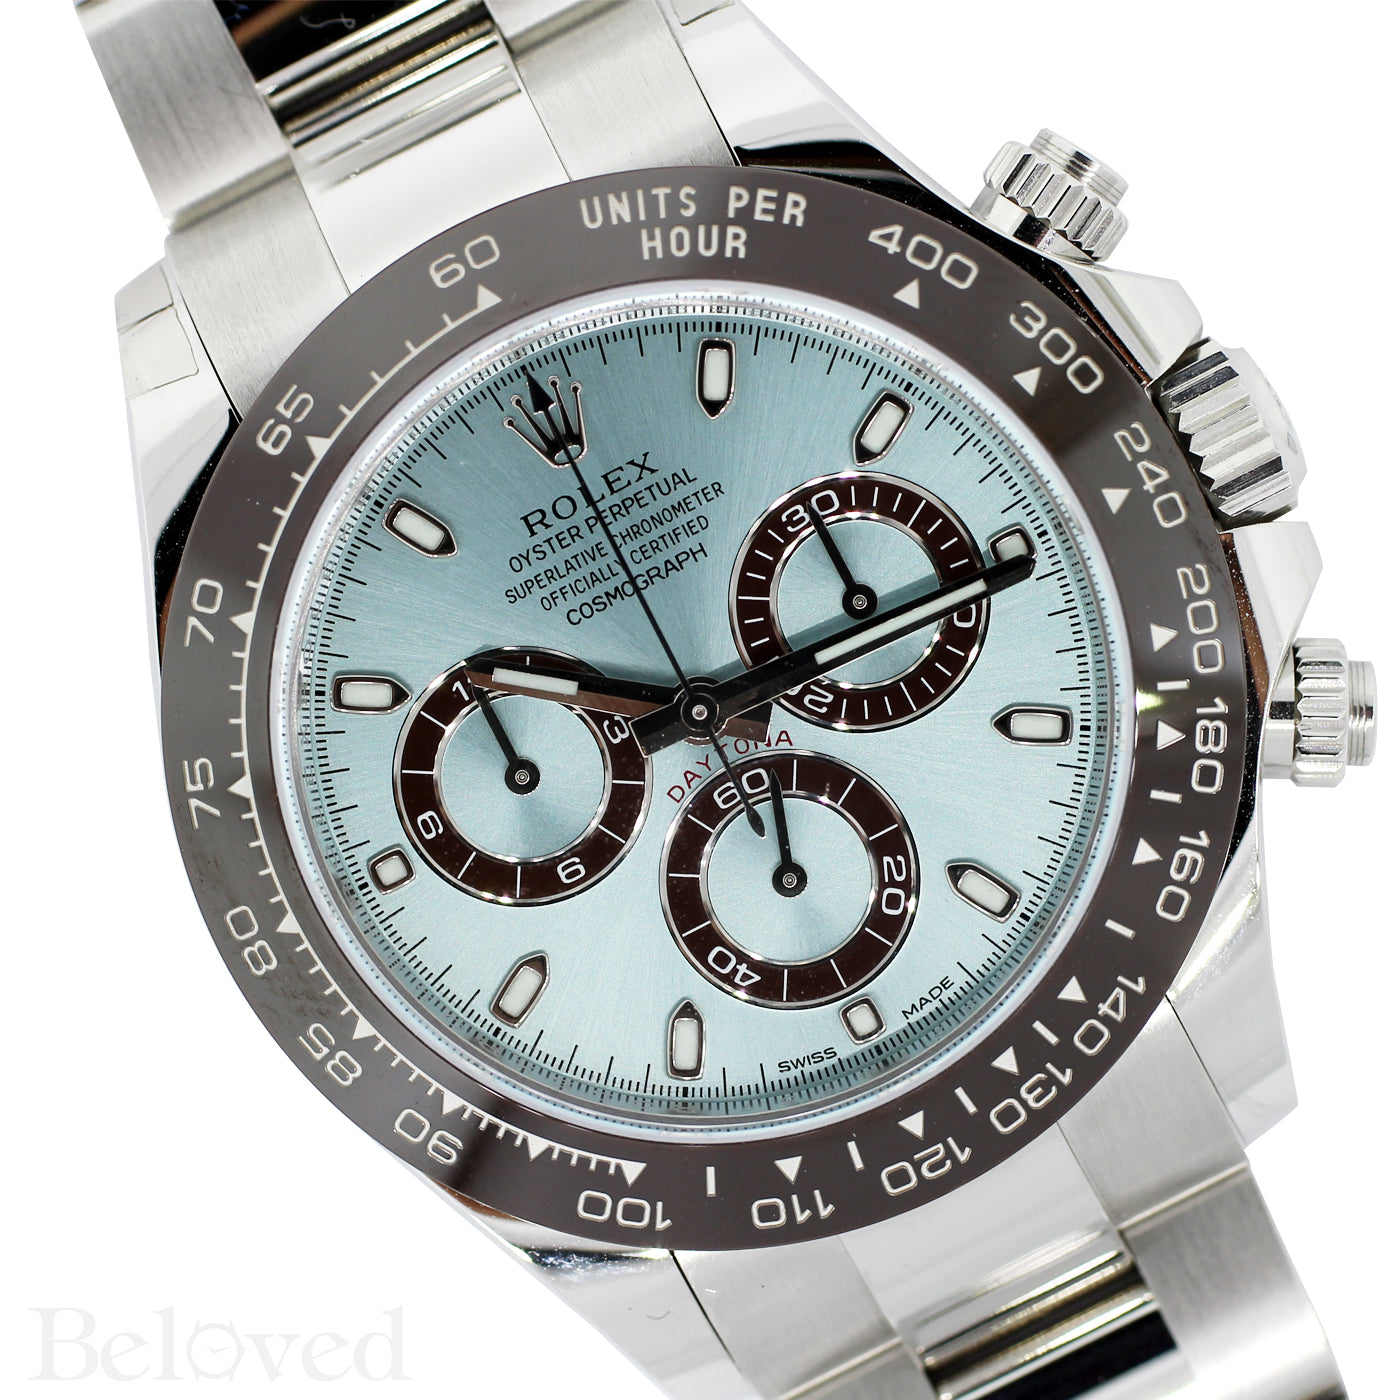 Rolex Daytona 116506 Unworn and Complete with Five Year Warranty Card Image 5